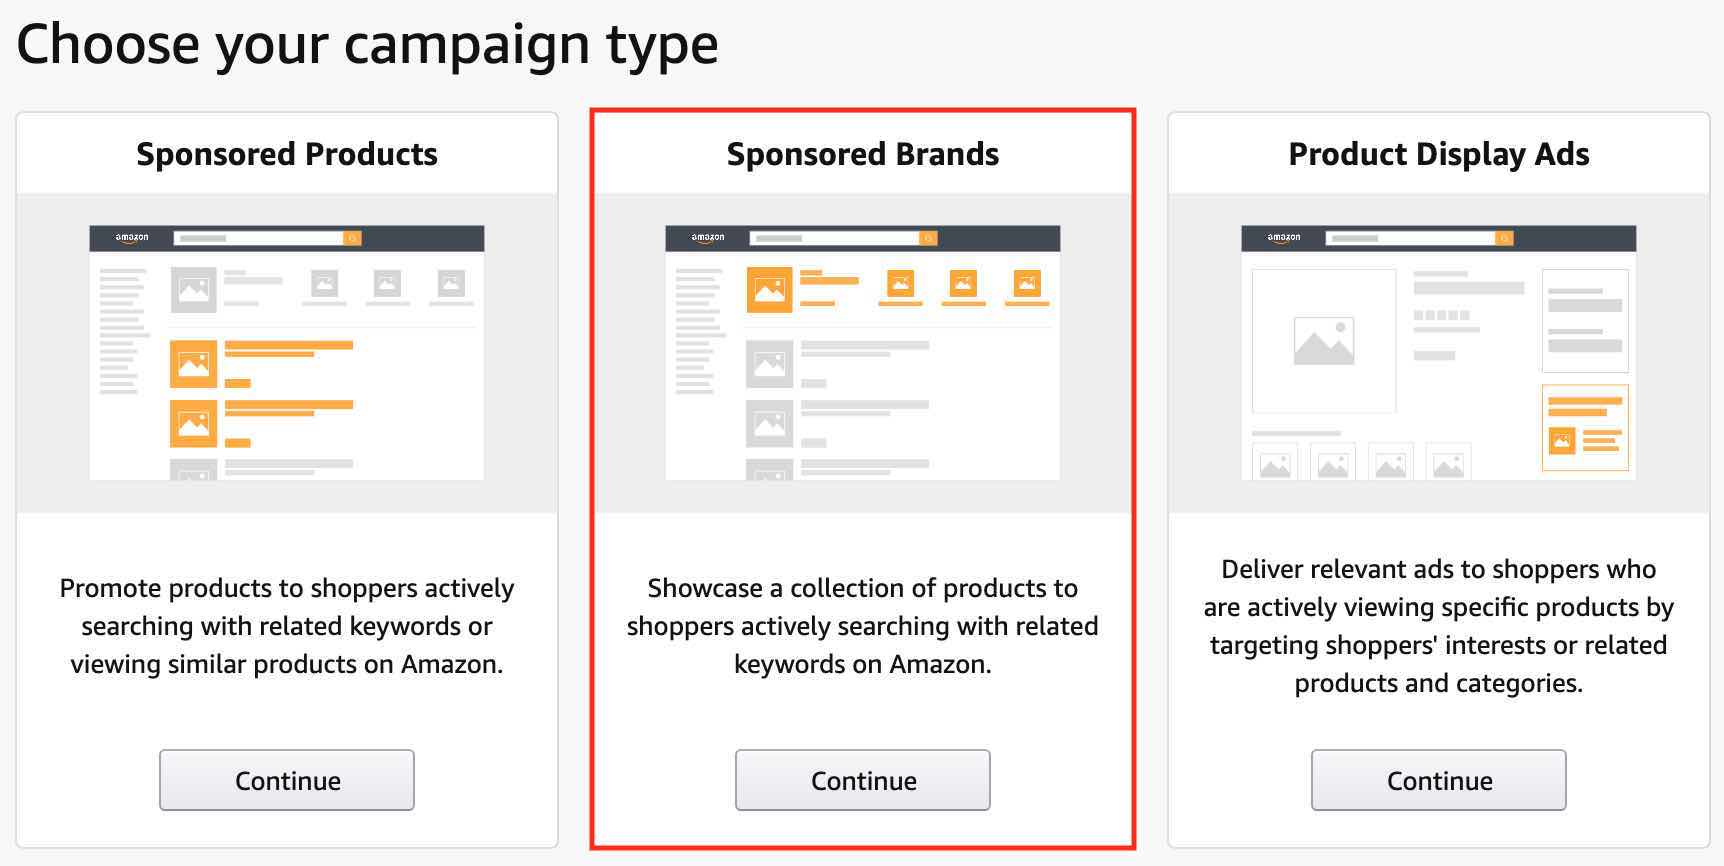 Sponsored Brands Tip of the Day #4: How to Analyze Your Ad